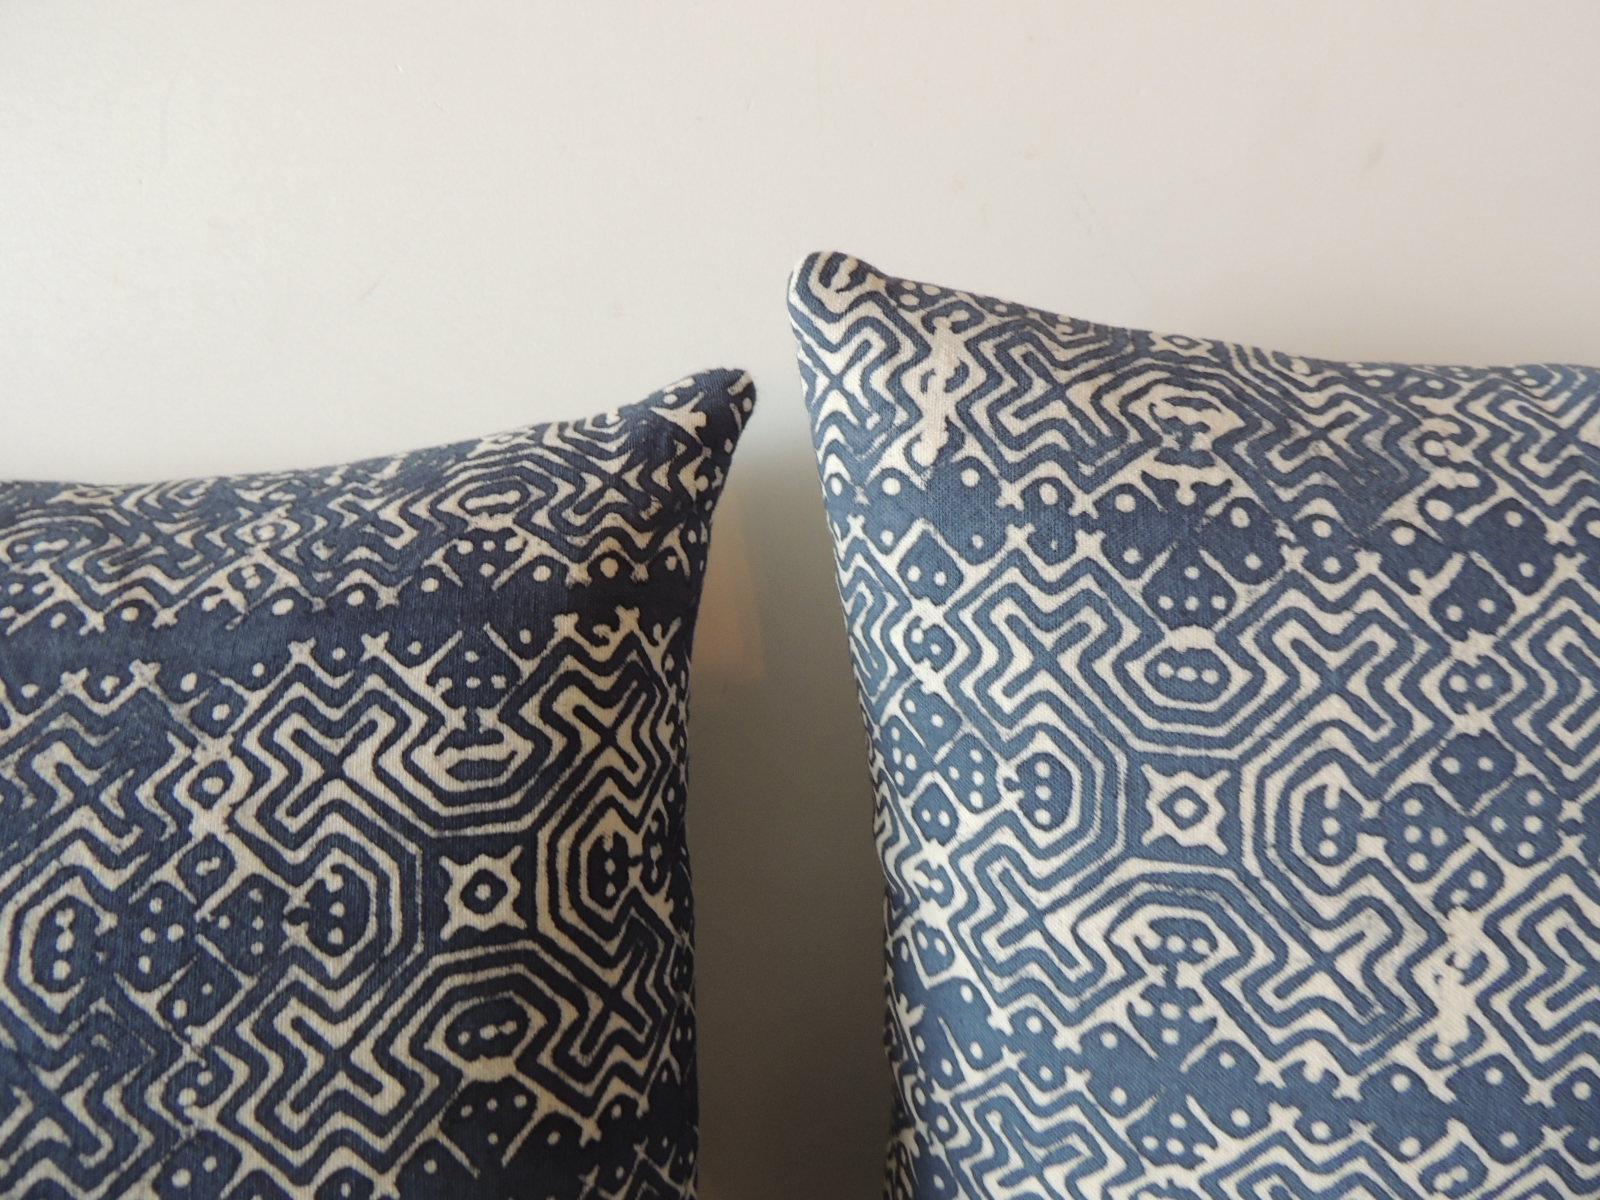 Pair of vintage blue and white petite hand-blocked batik decorative pillows.
Soft blue linen backings.
Decorative pillow handcrafted and designed in the USA. 
Closure by stitch (no zipper closure) with custom made pillow insert.
Size: 11' H x